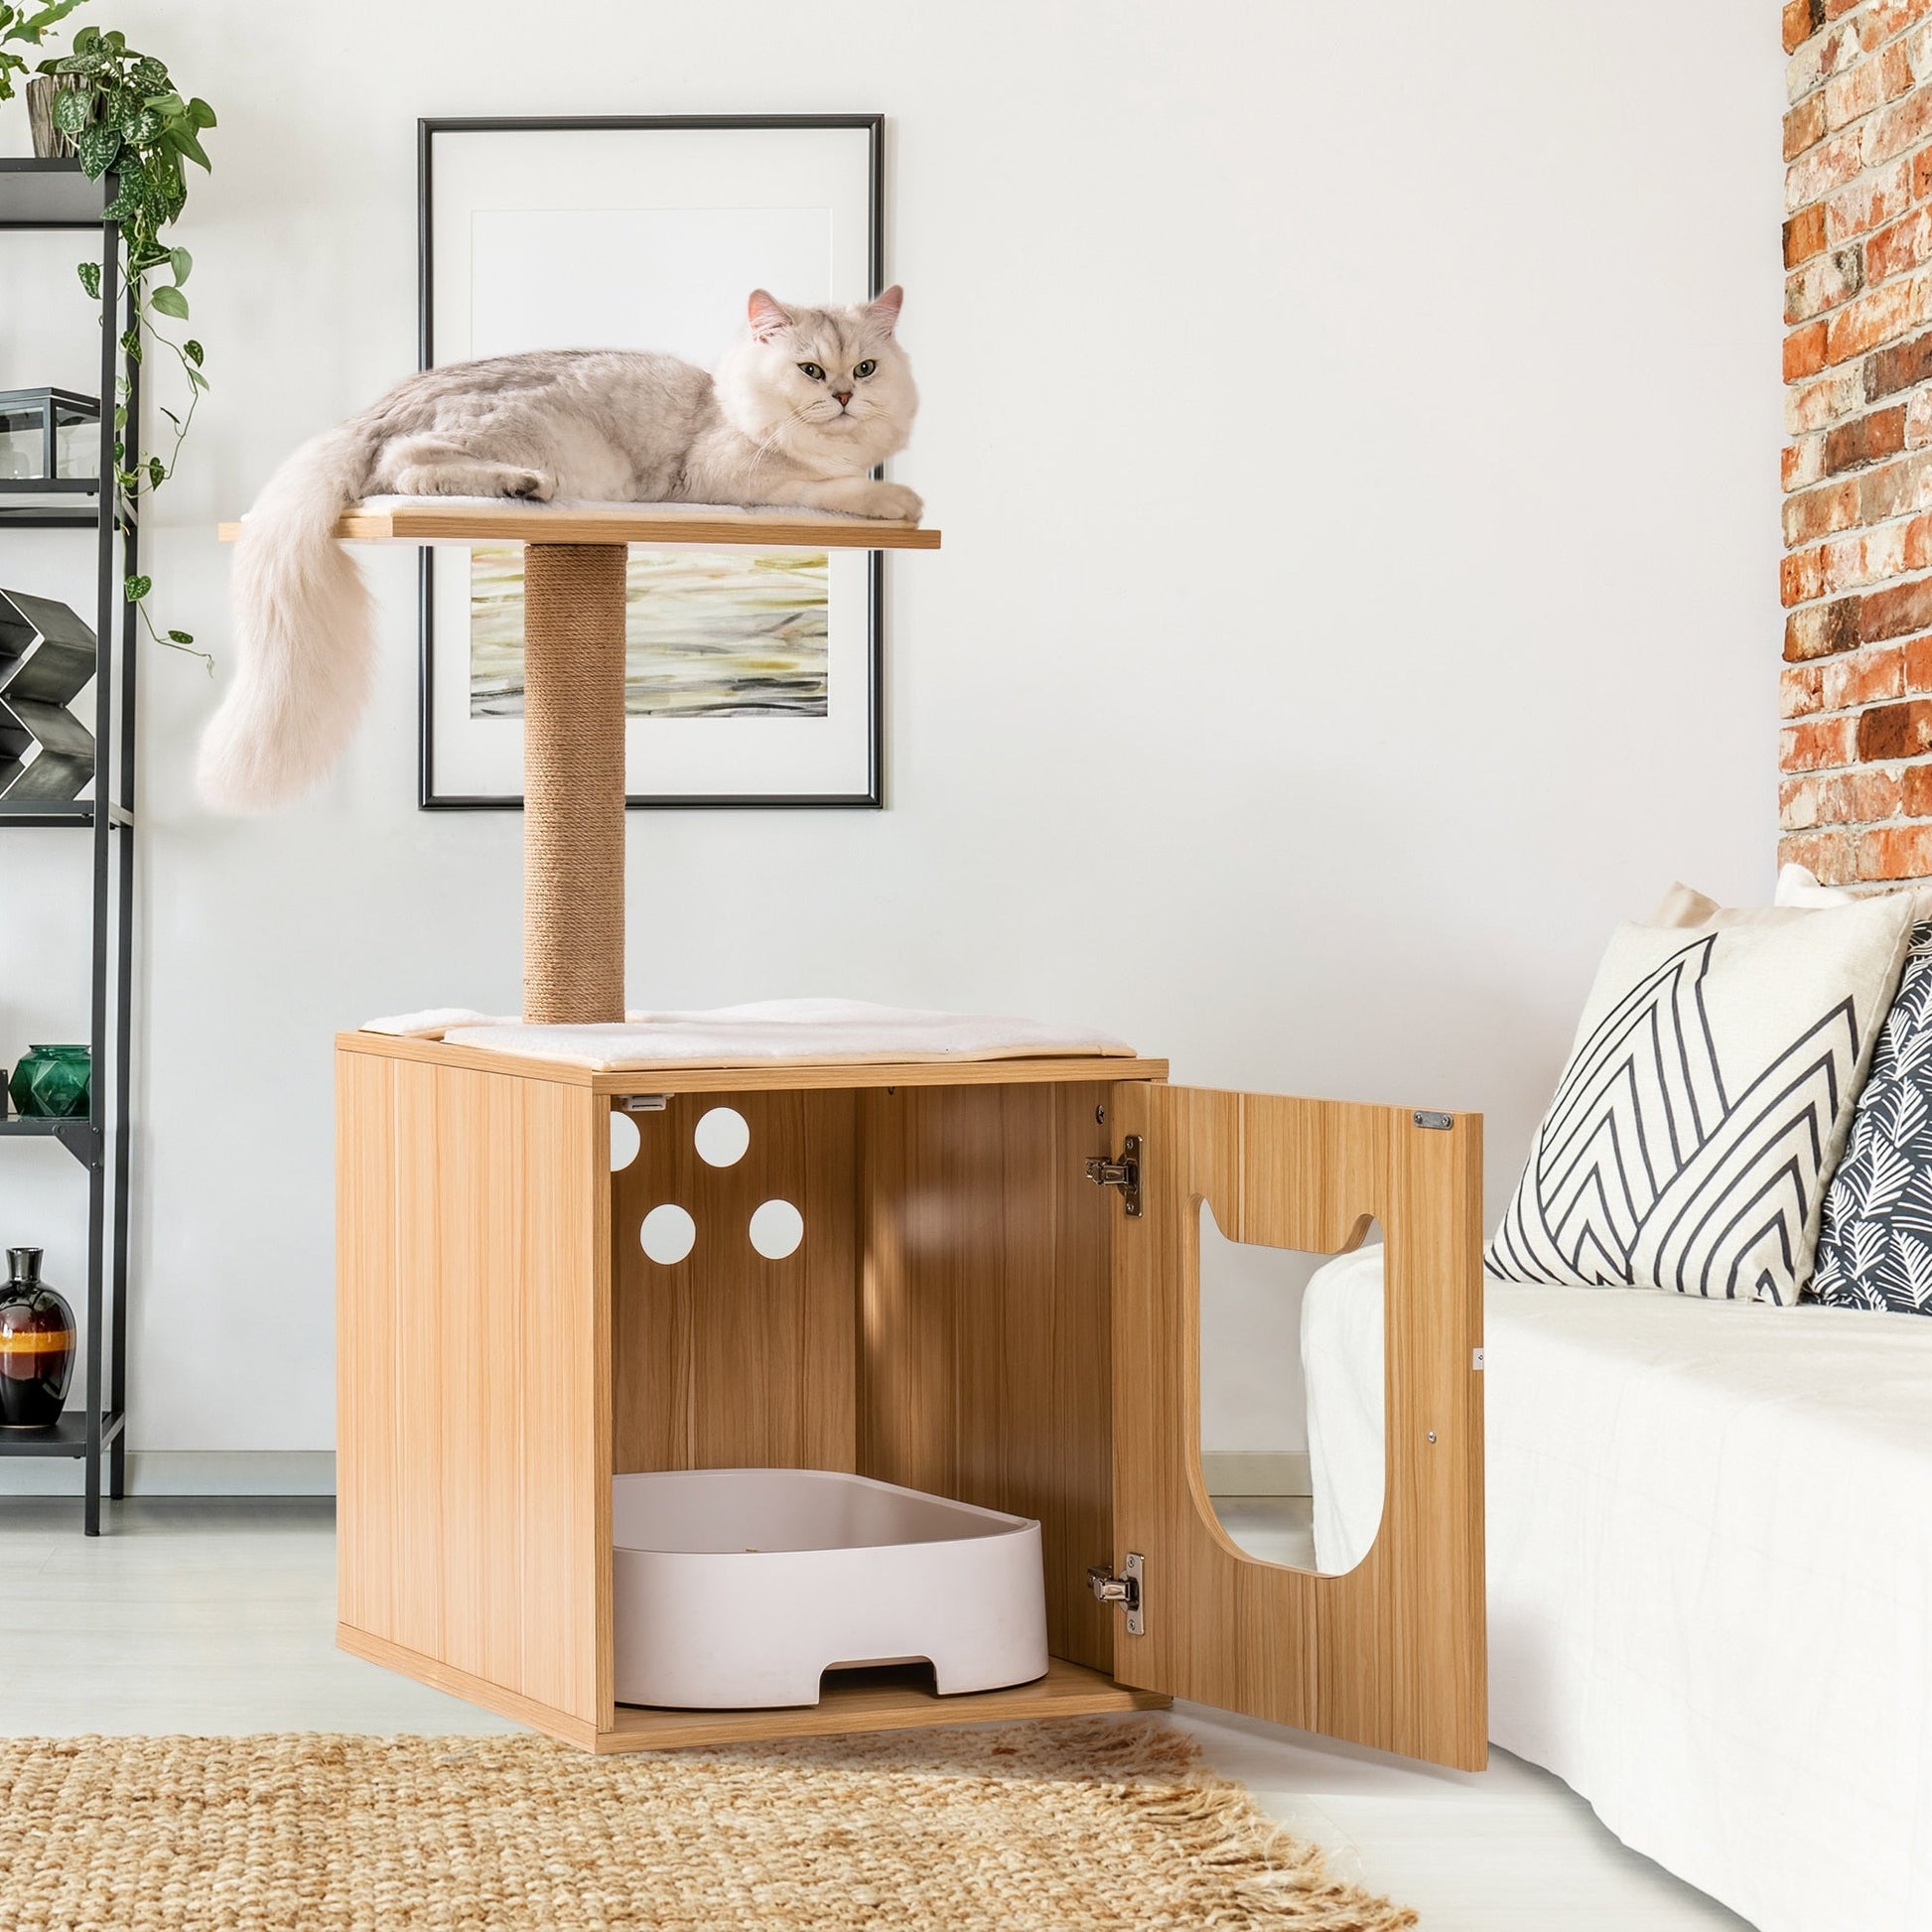 Full view of wooden cat tree with a single platform and enclosed space that is able to fit a cat litter box